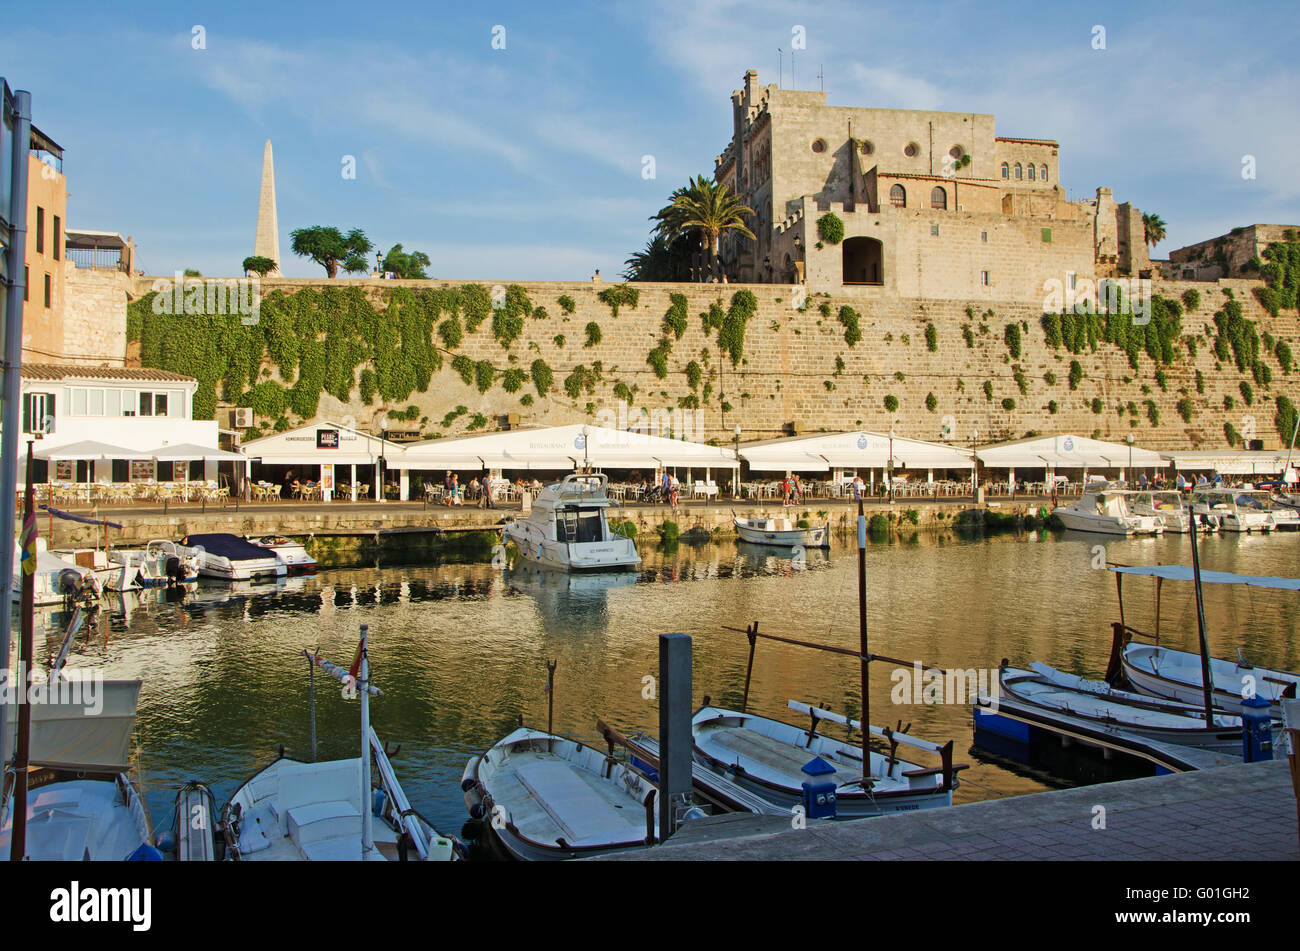 Menorca, Balearic Islands, Spain, Europe: skyline and panoramic view of the port and the ancient walls of Ciutadella, the former capital city Stock Photo